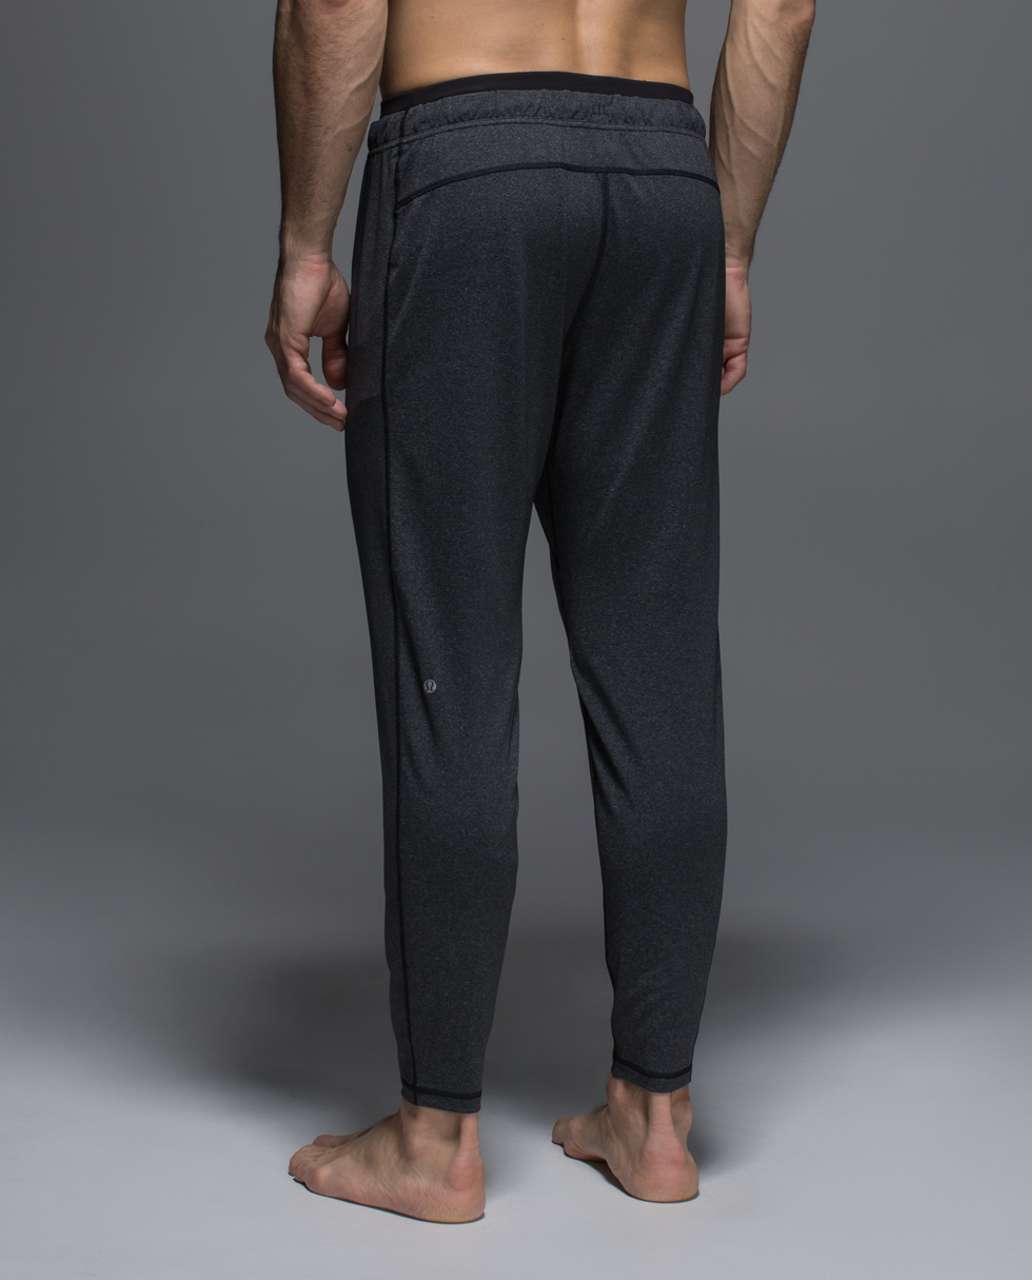 Lululemon On The Mat Pant - Heathered Black (First Release)